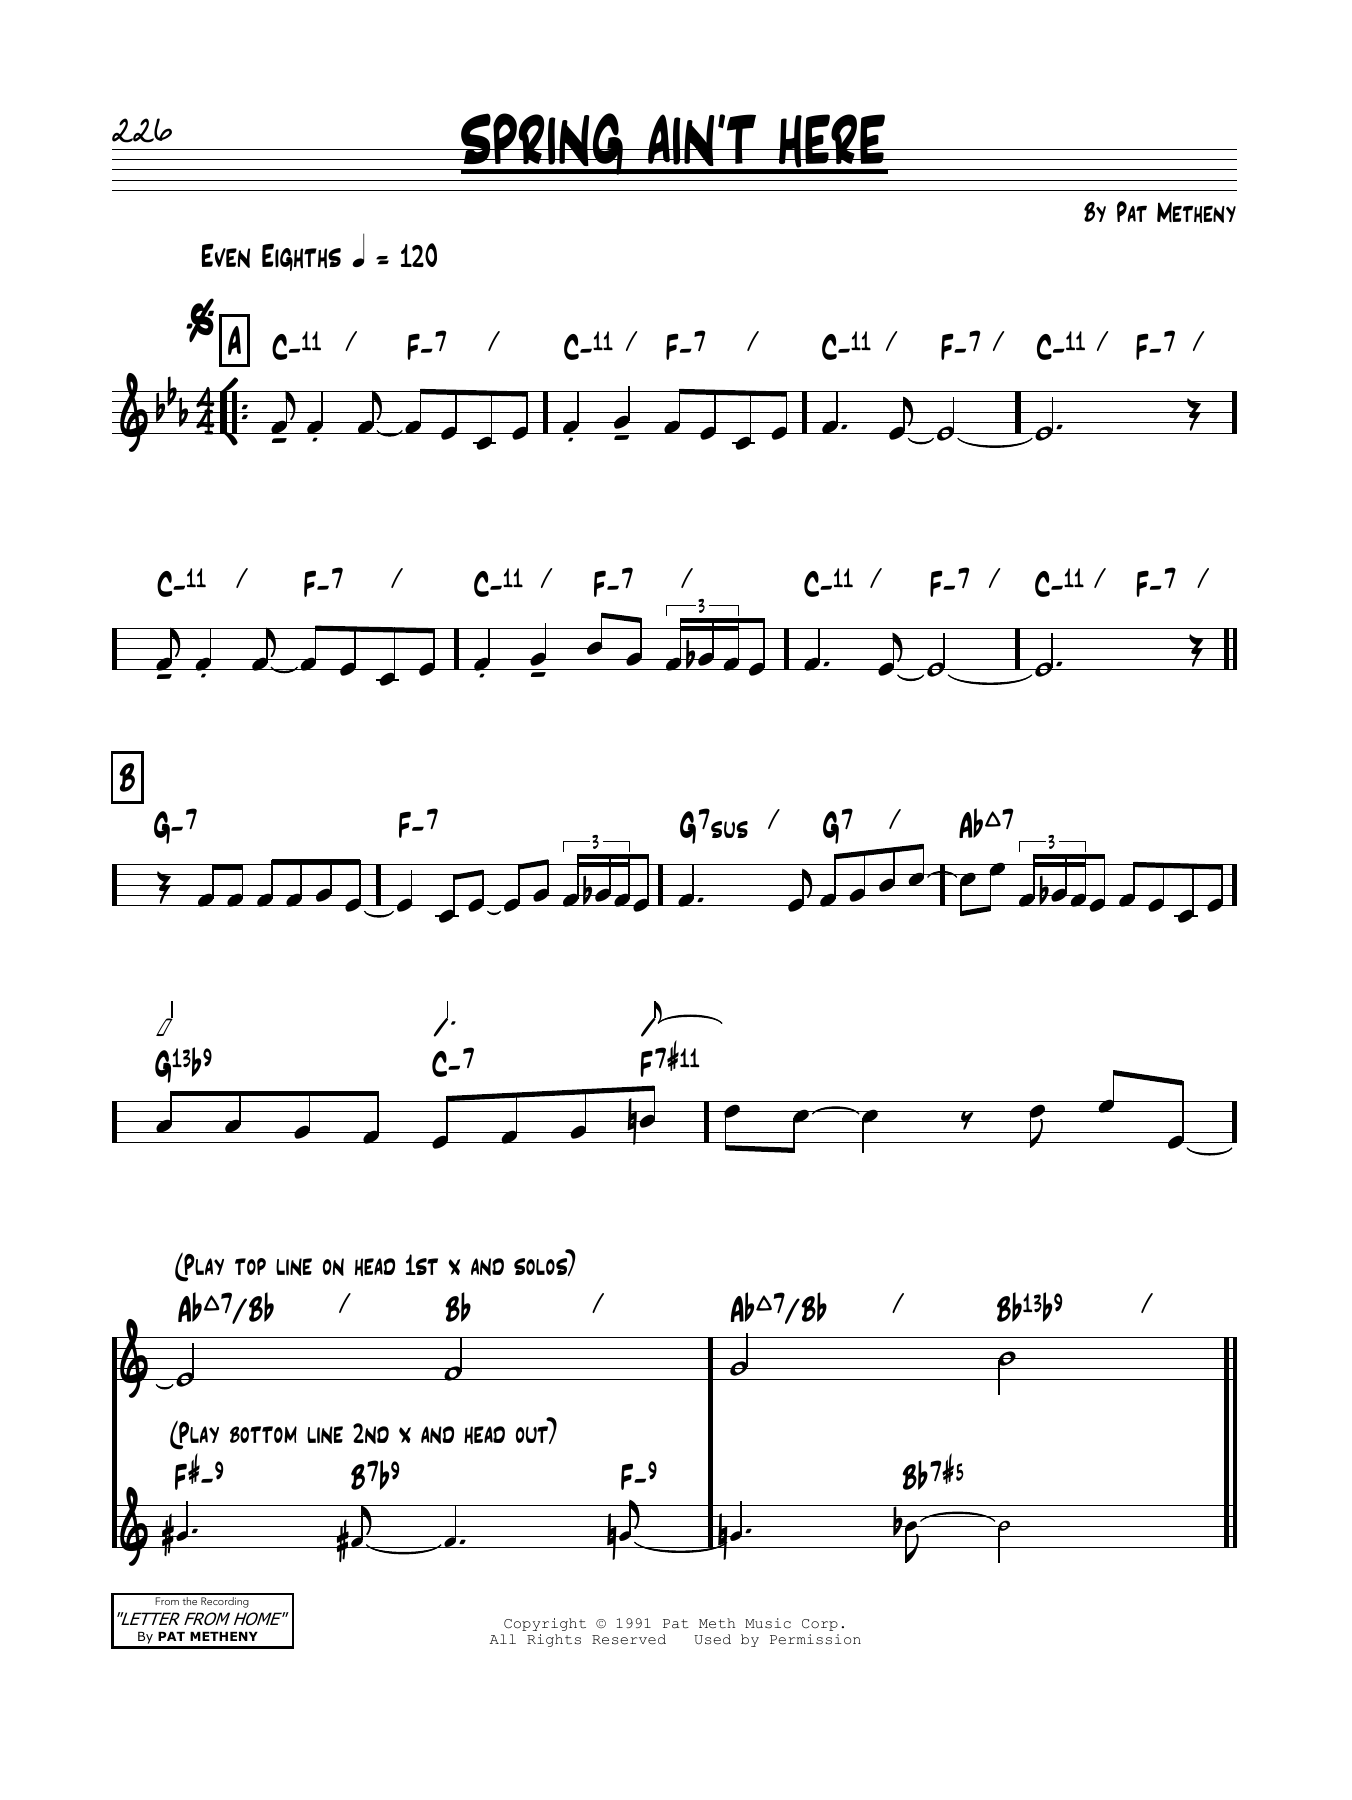 Download Pat Metheny Spring Ain't Here Sheet Music